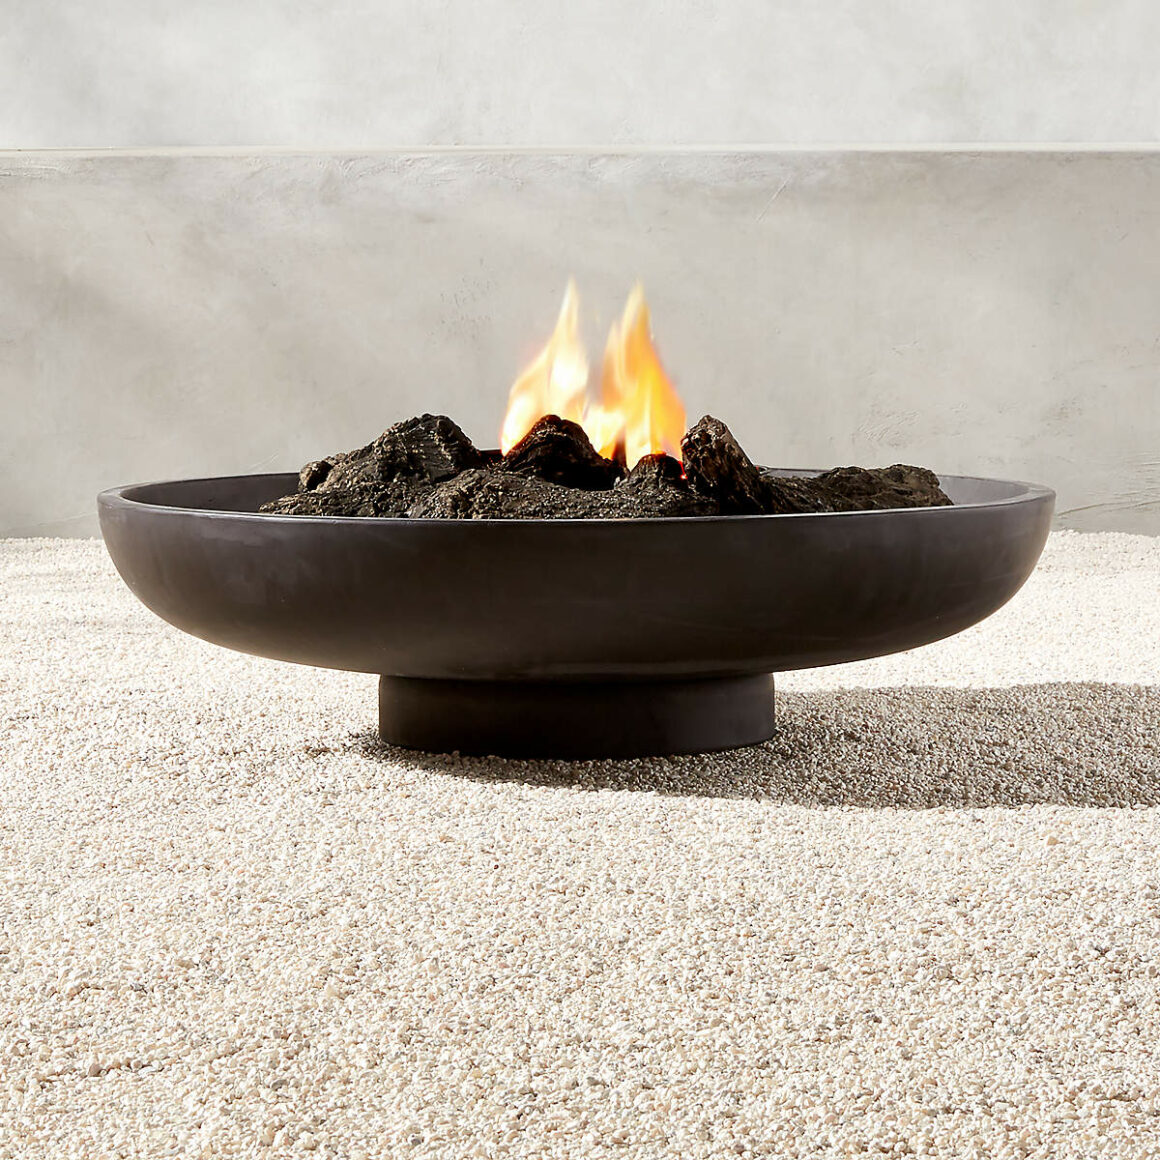 Best Minimalist Outdoor Fireplaces & Fire Pits - CB2 Form Cement Pit